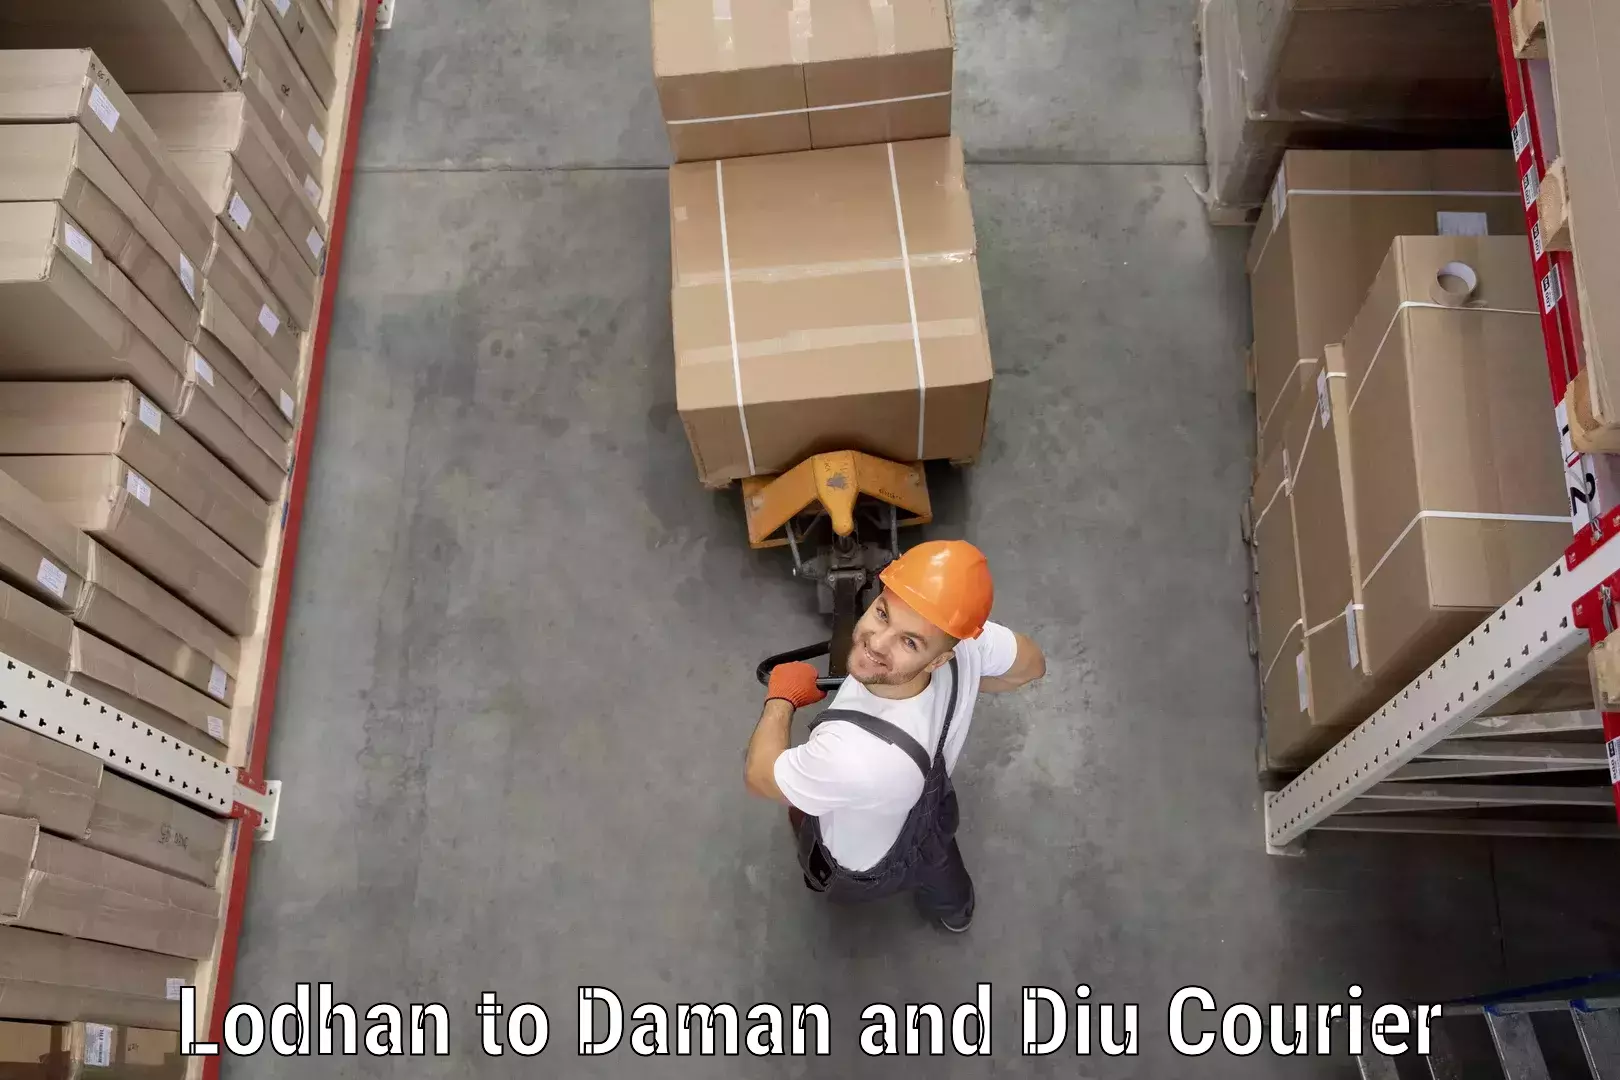 Supply chain efficiency in Lodhan to Daman and Diu